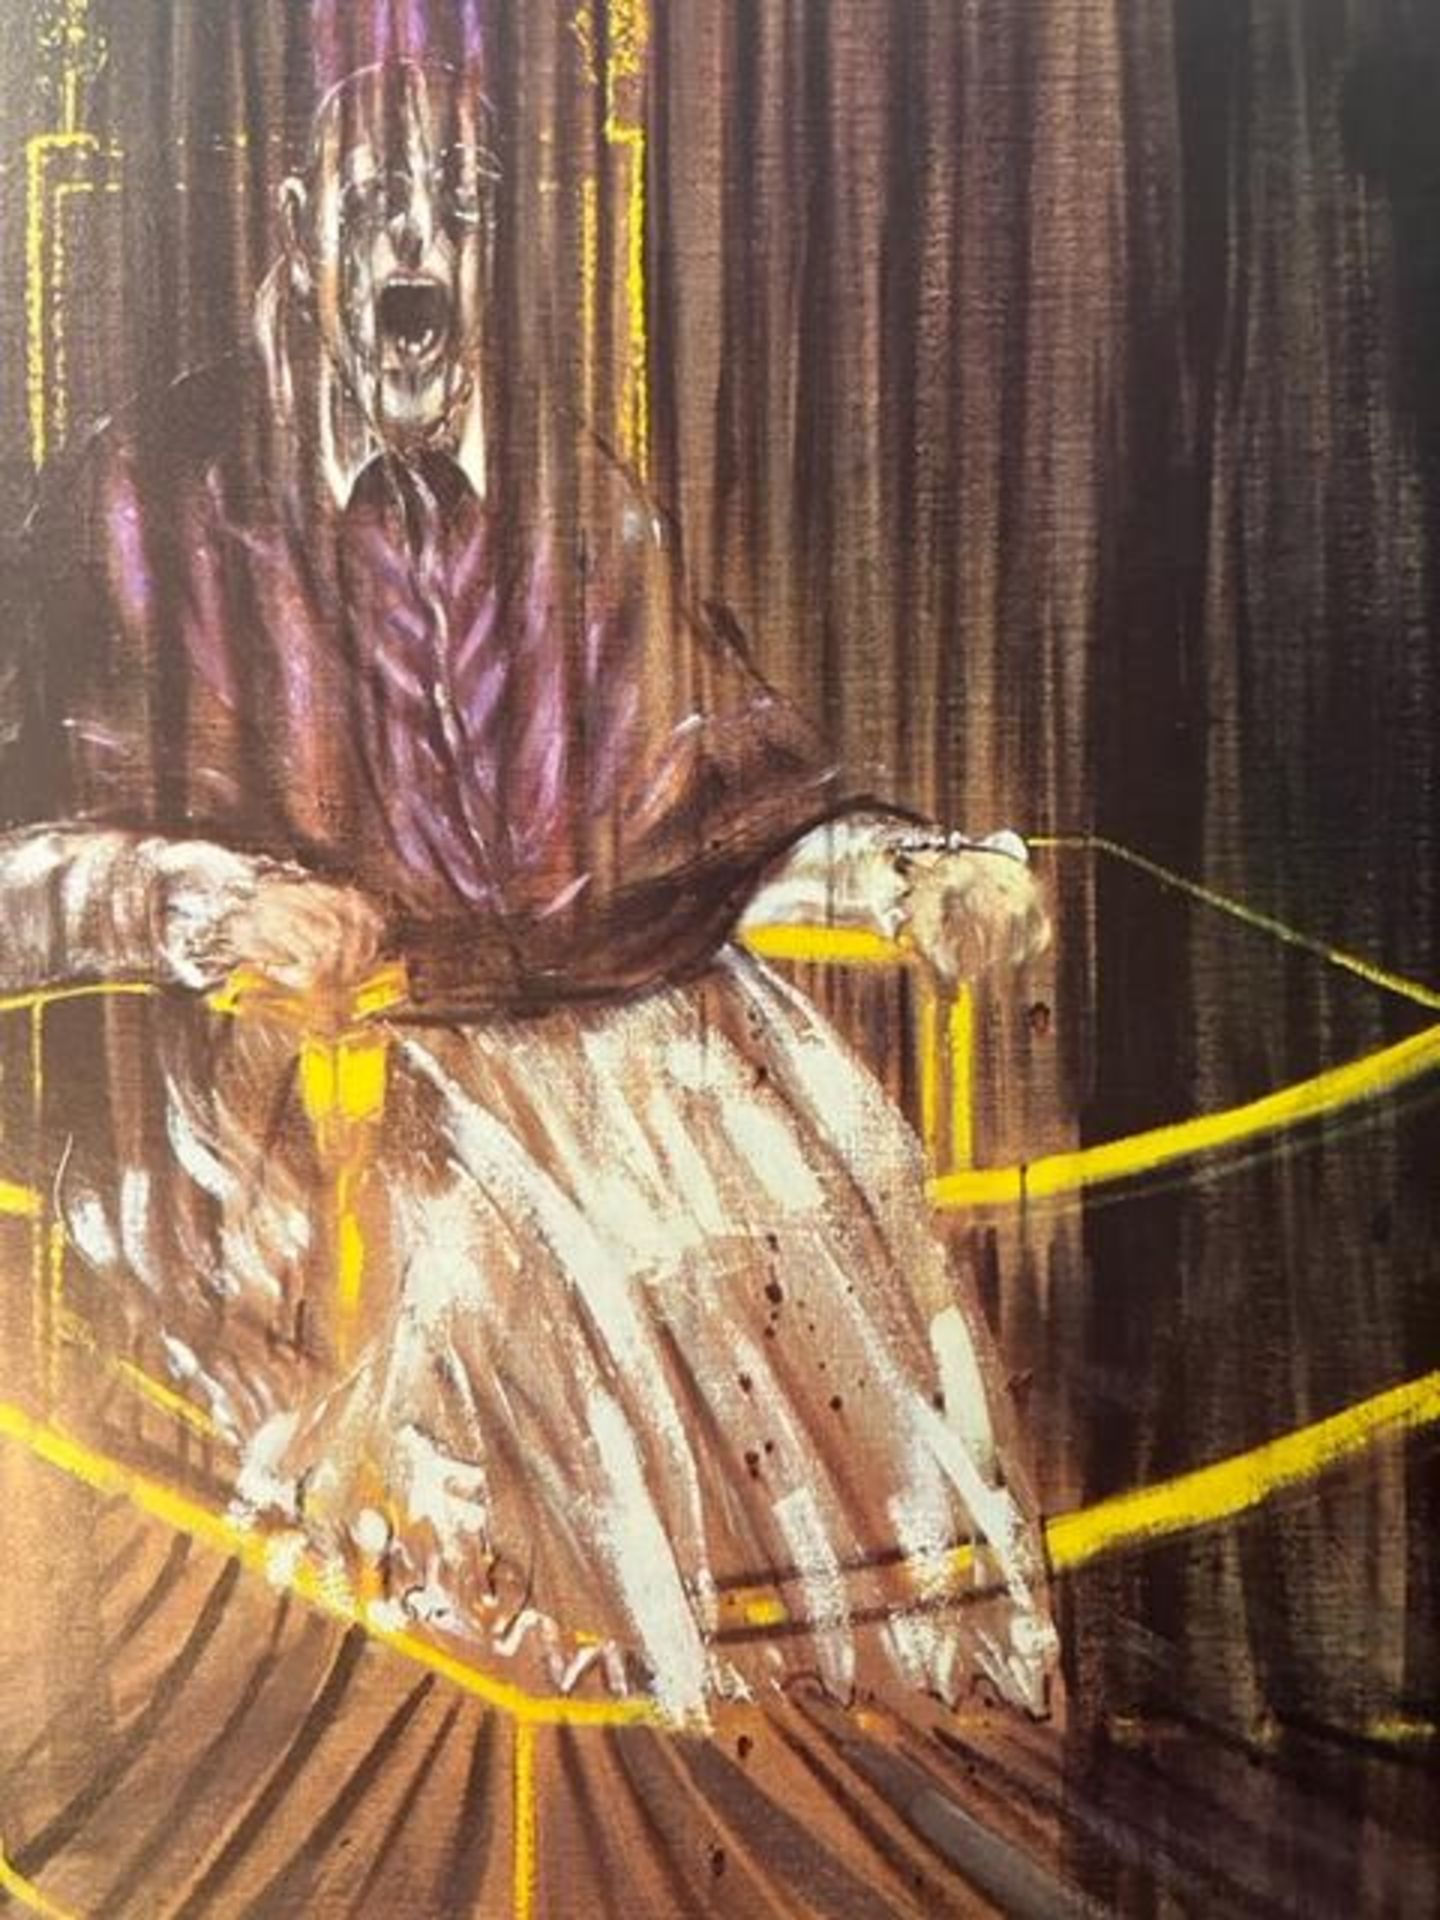 Francis Bacon "Study after Velazques's Portrait of Pope Innocent X" Print. - Image 5 of 6